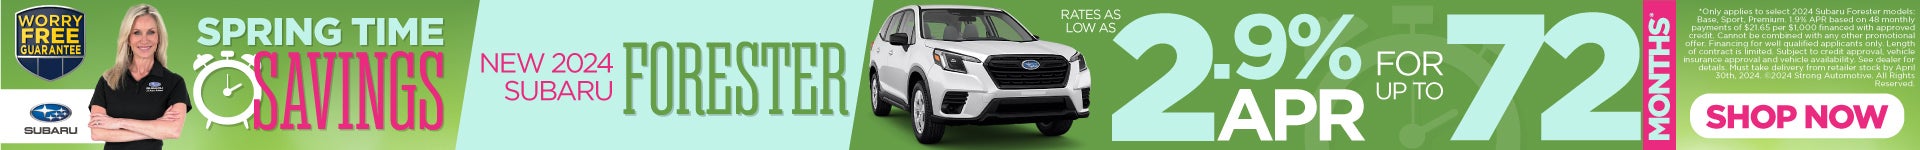 New 2024 Subaru Forester | Rates as low as 2.9% APR for up to 72 months*